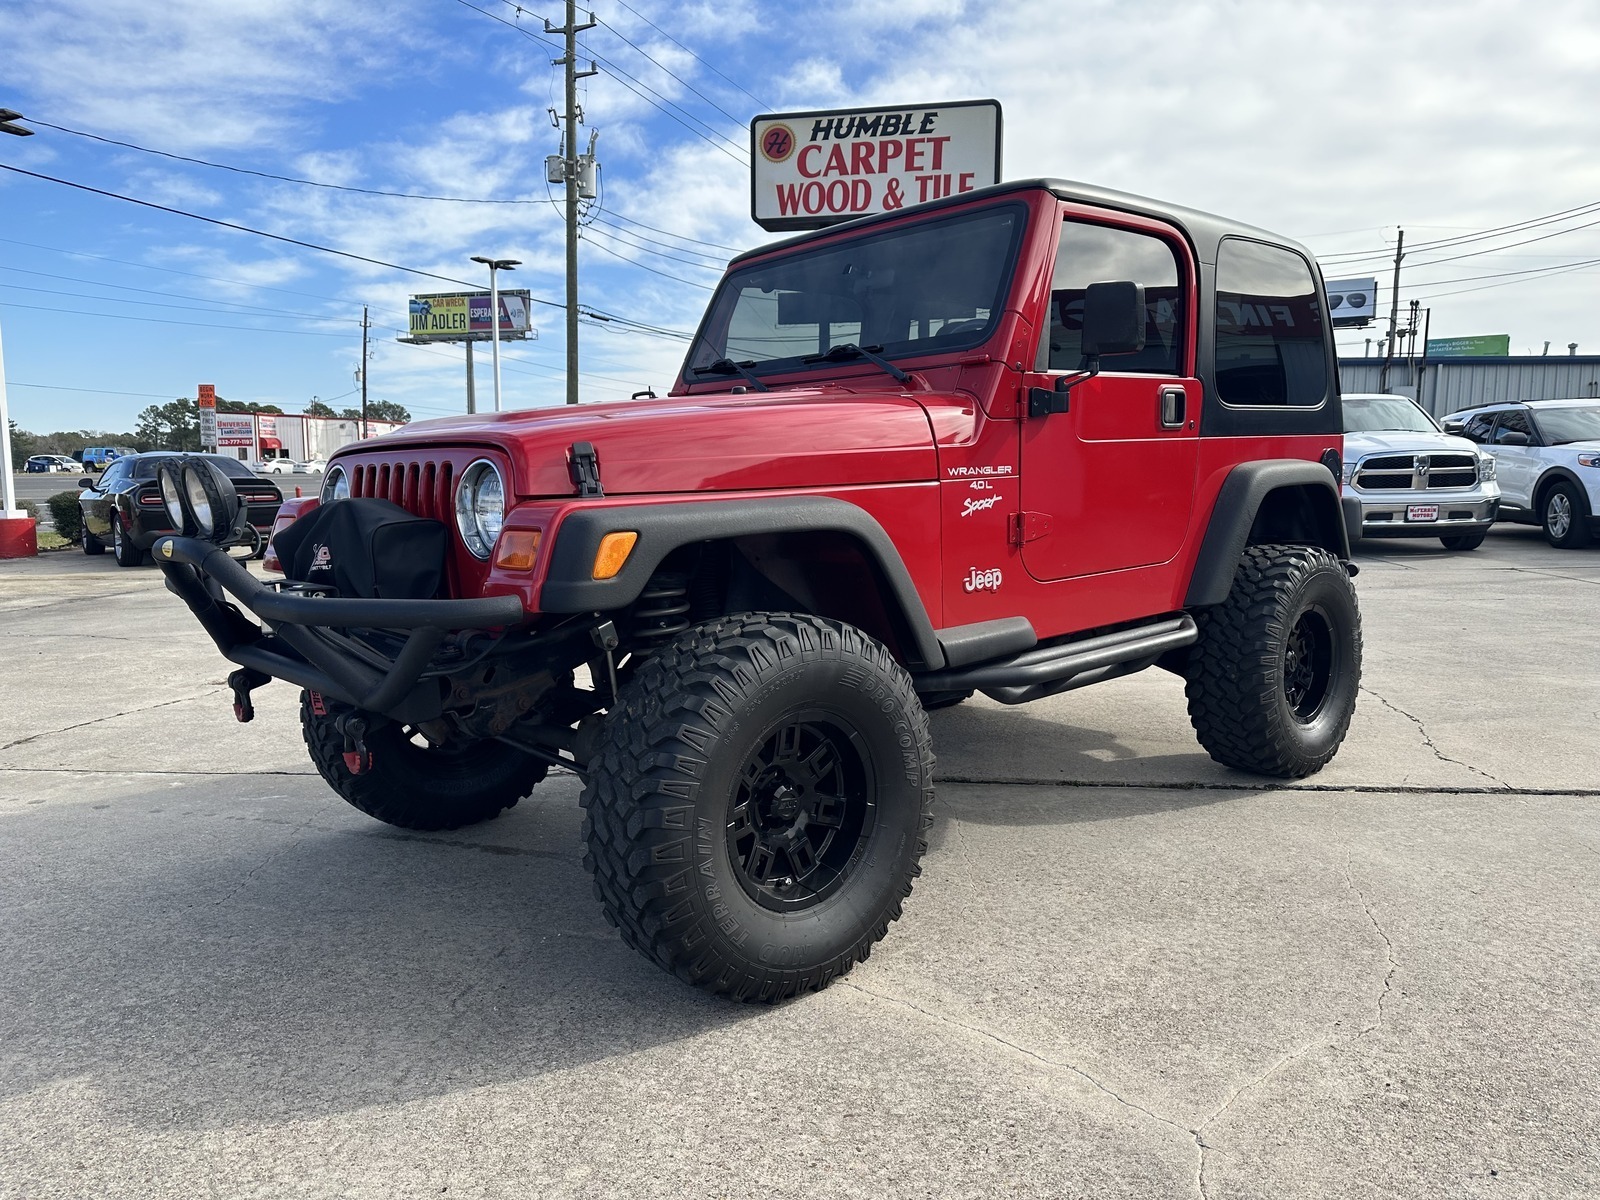 Used 2000 Jeep Wrangler for Sale Near Me in Houston, TX - Autotrader